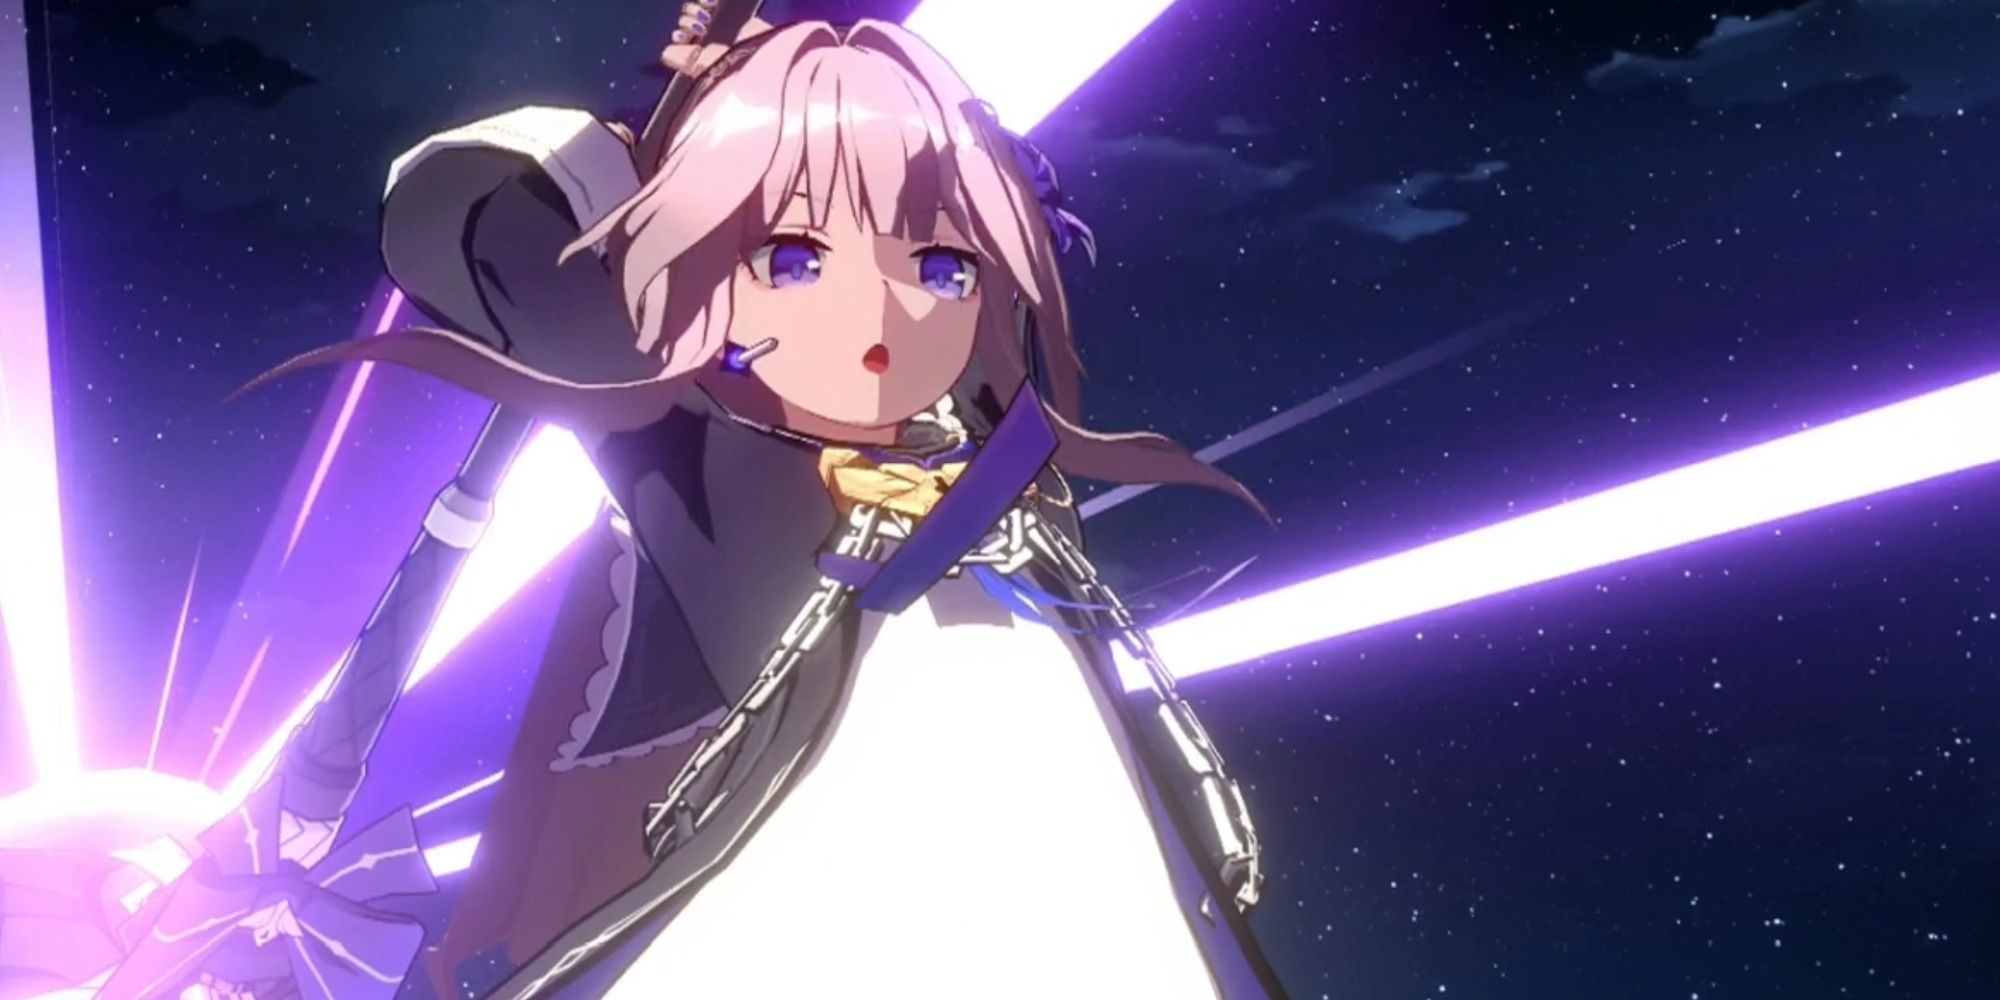 Herta performing her It's Magic, I Added Some Magic Ultimate attack with her massive hammer in Honkai: Star Rail